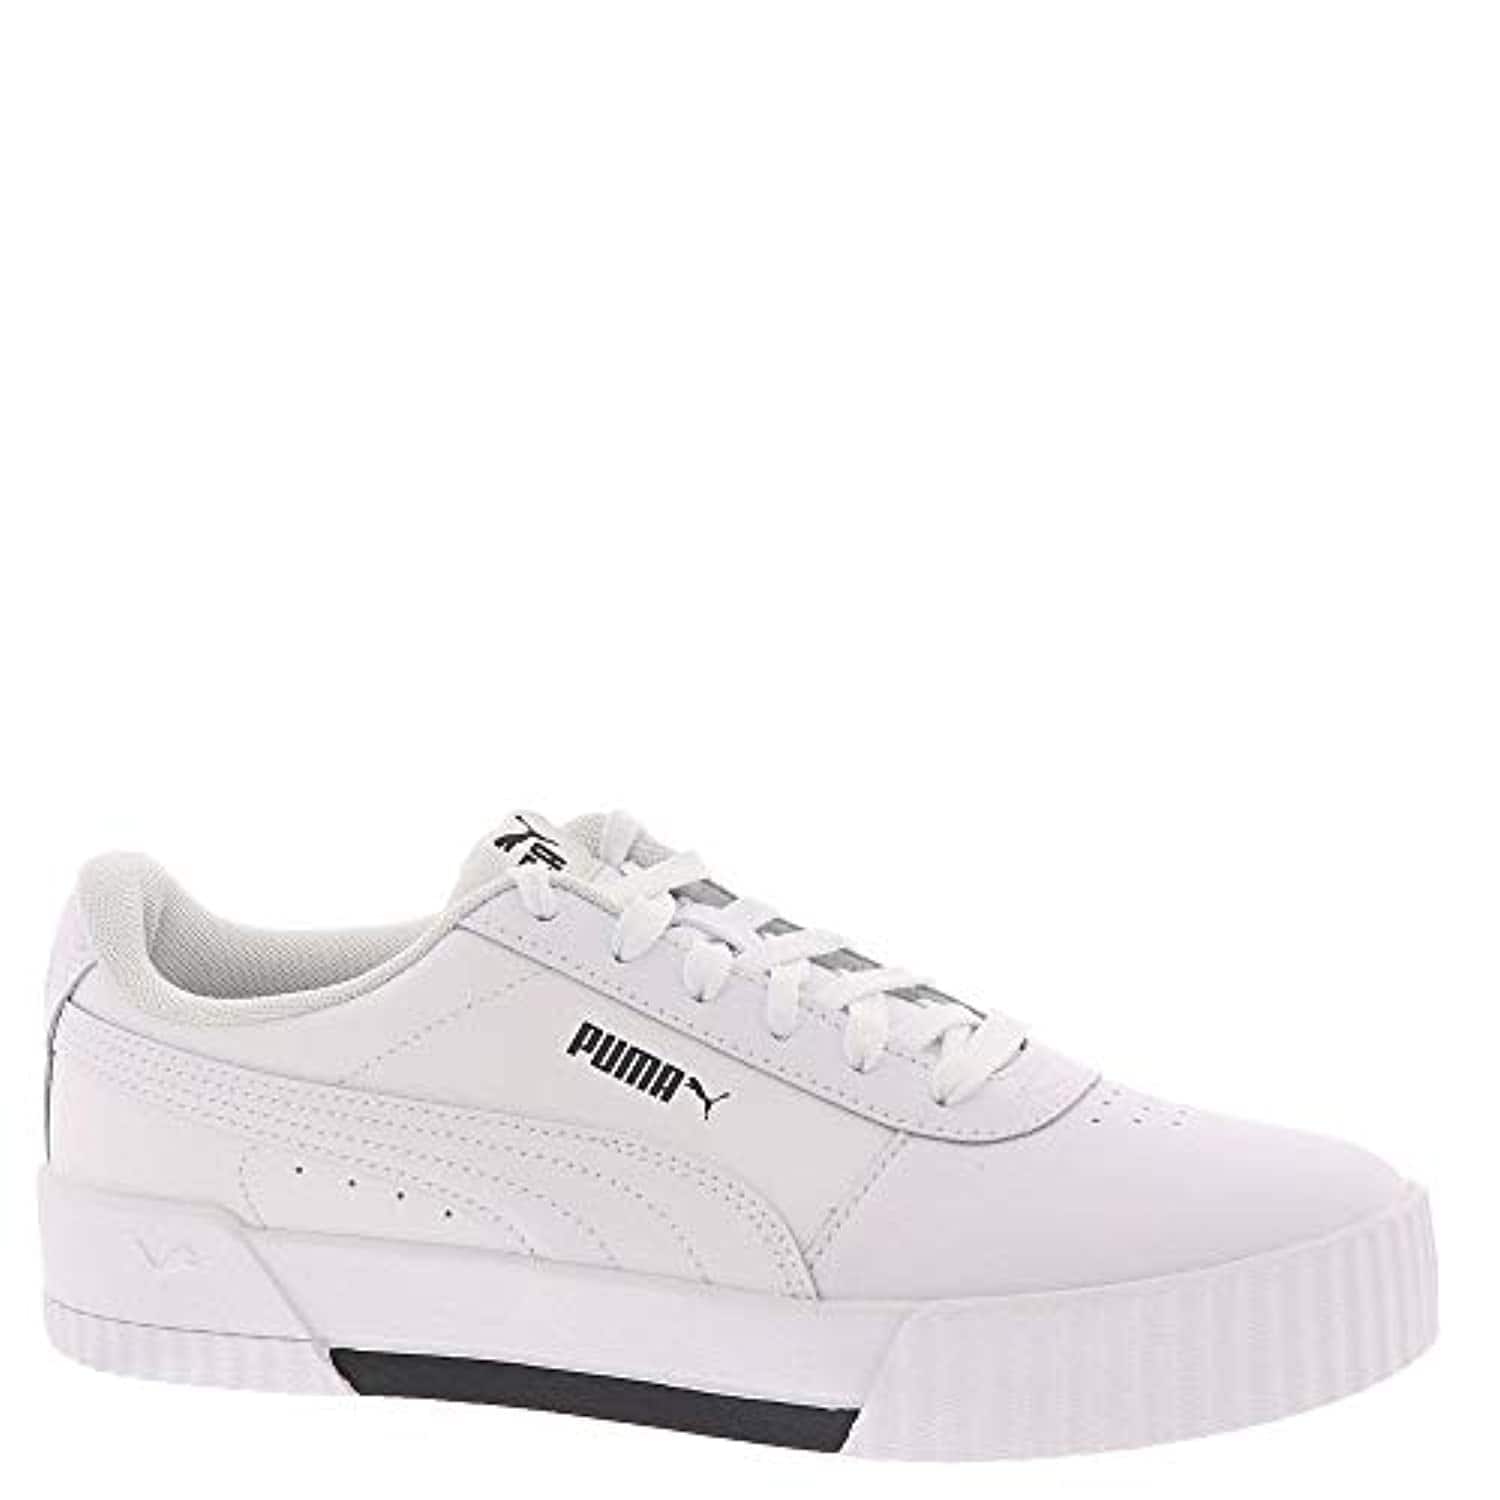 puma youth sneakers